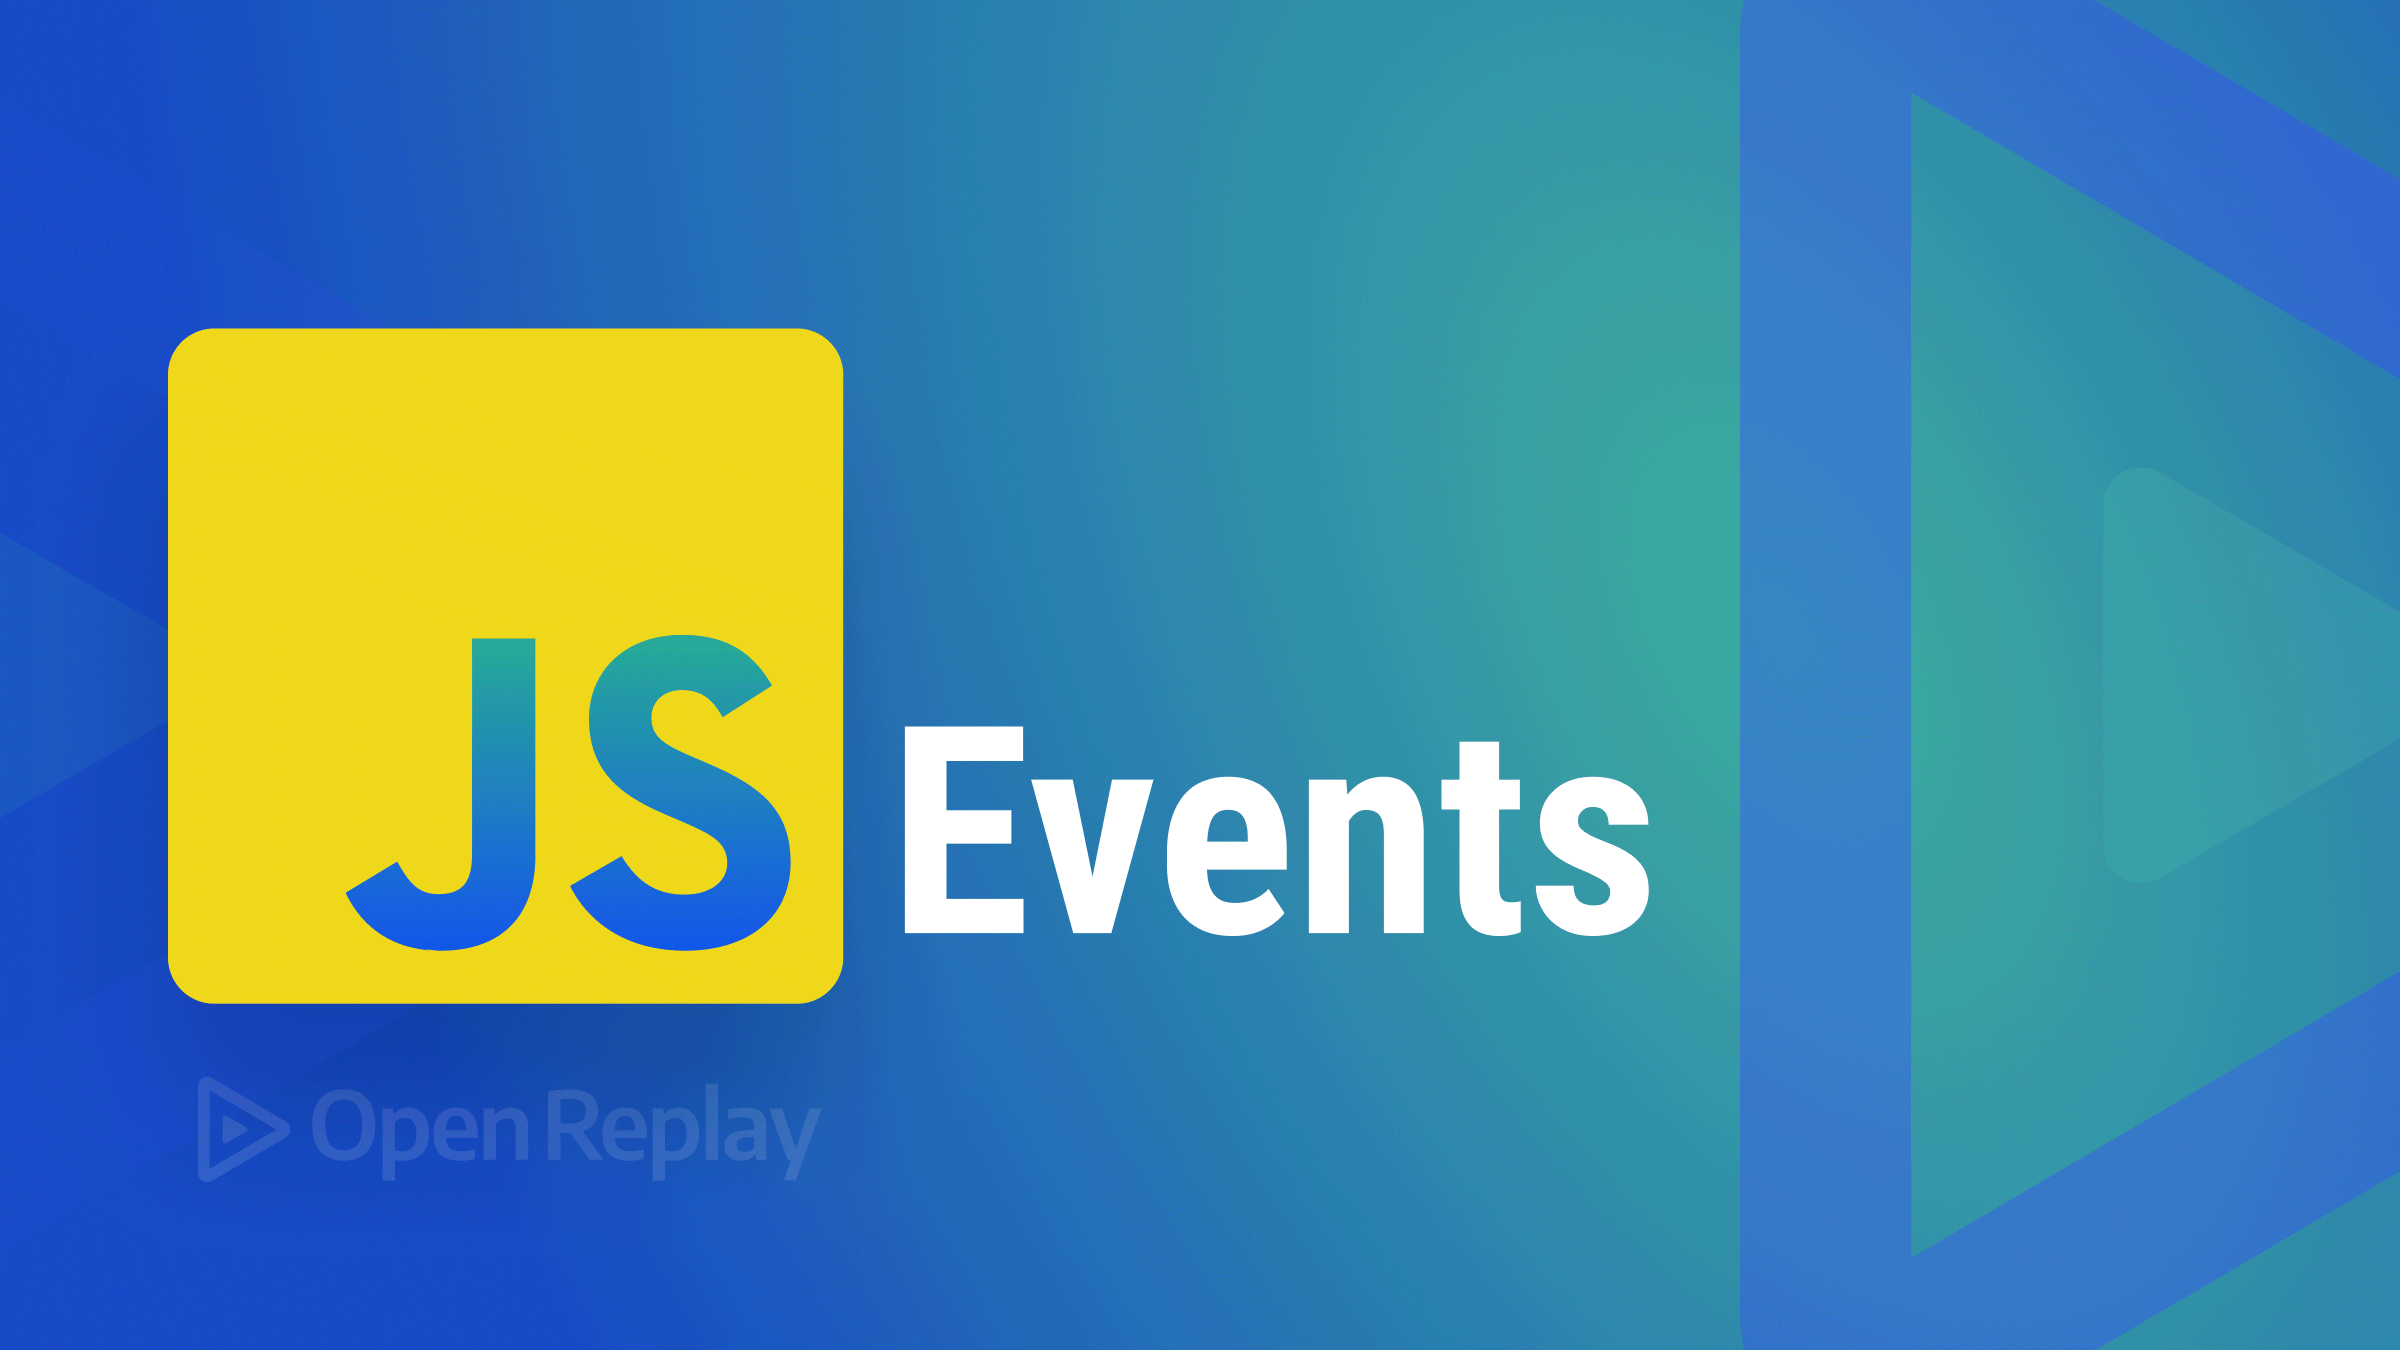 All about JavaScript Events